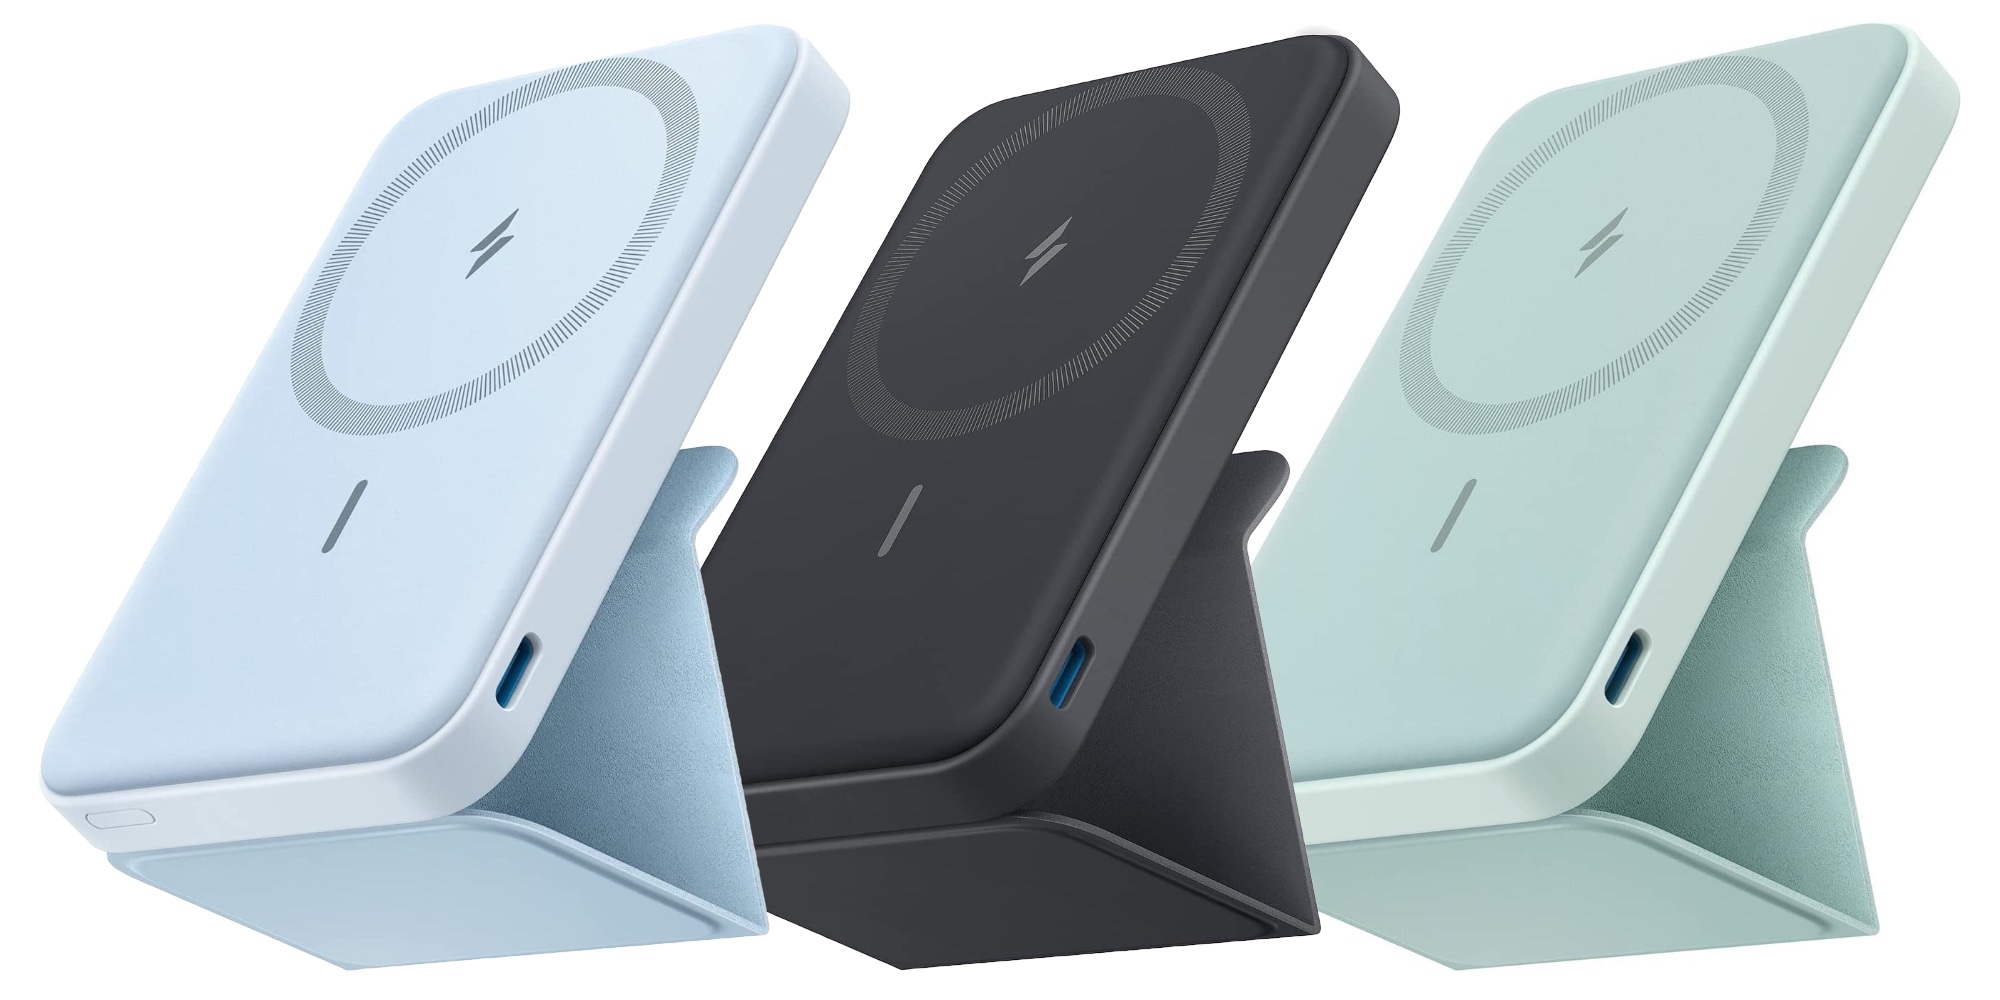 Anker's new MagGo MagSafe Power Bank now even more affordable in four  styles at $25.50